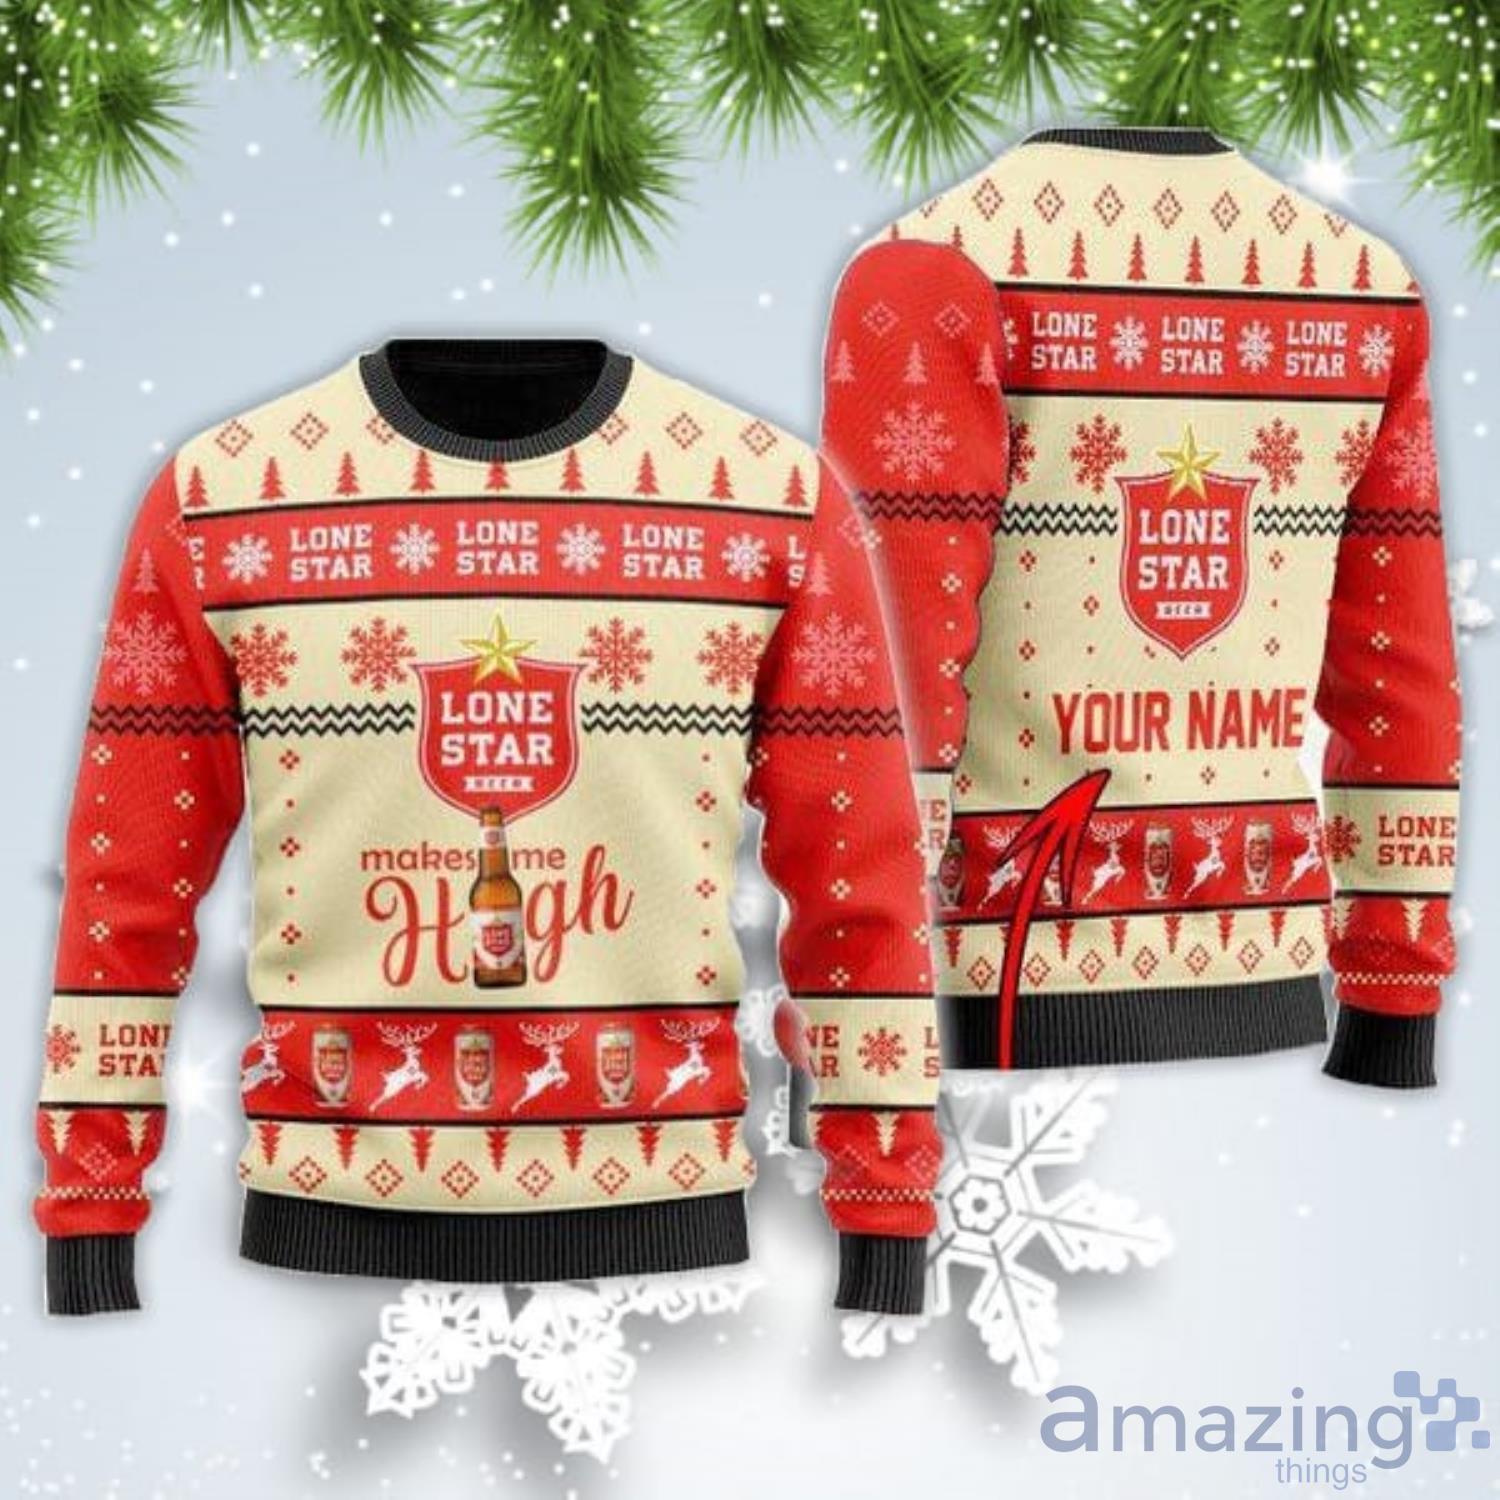 Personalized Name Lone Star Beer Makes Me High Christmas Gift Ugly Christmas Sweater Product Photo 1